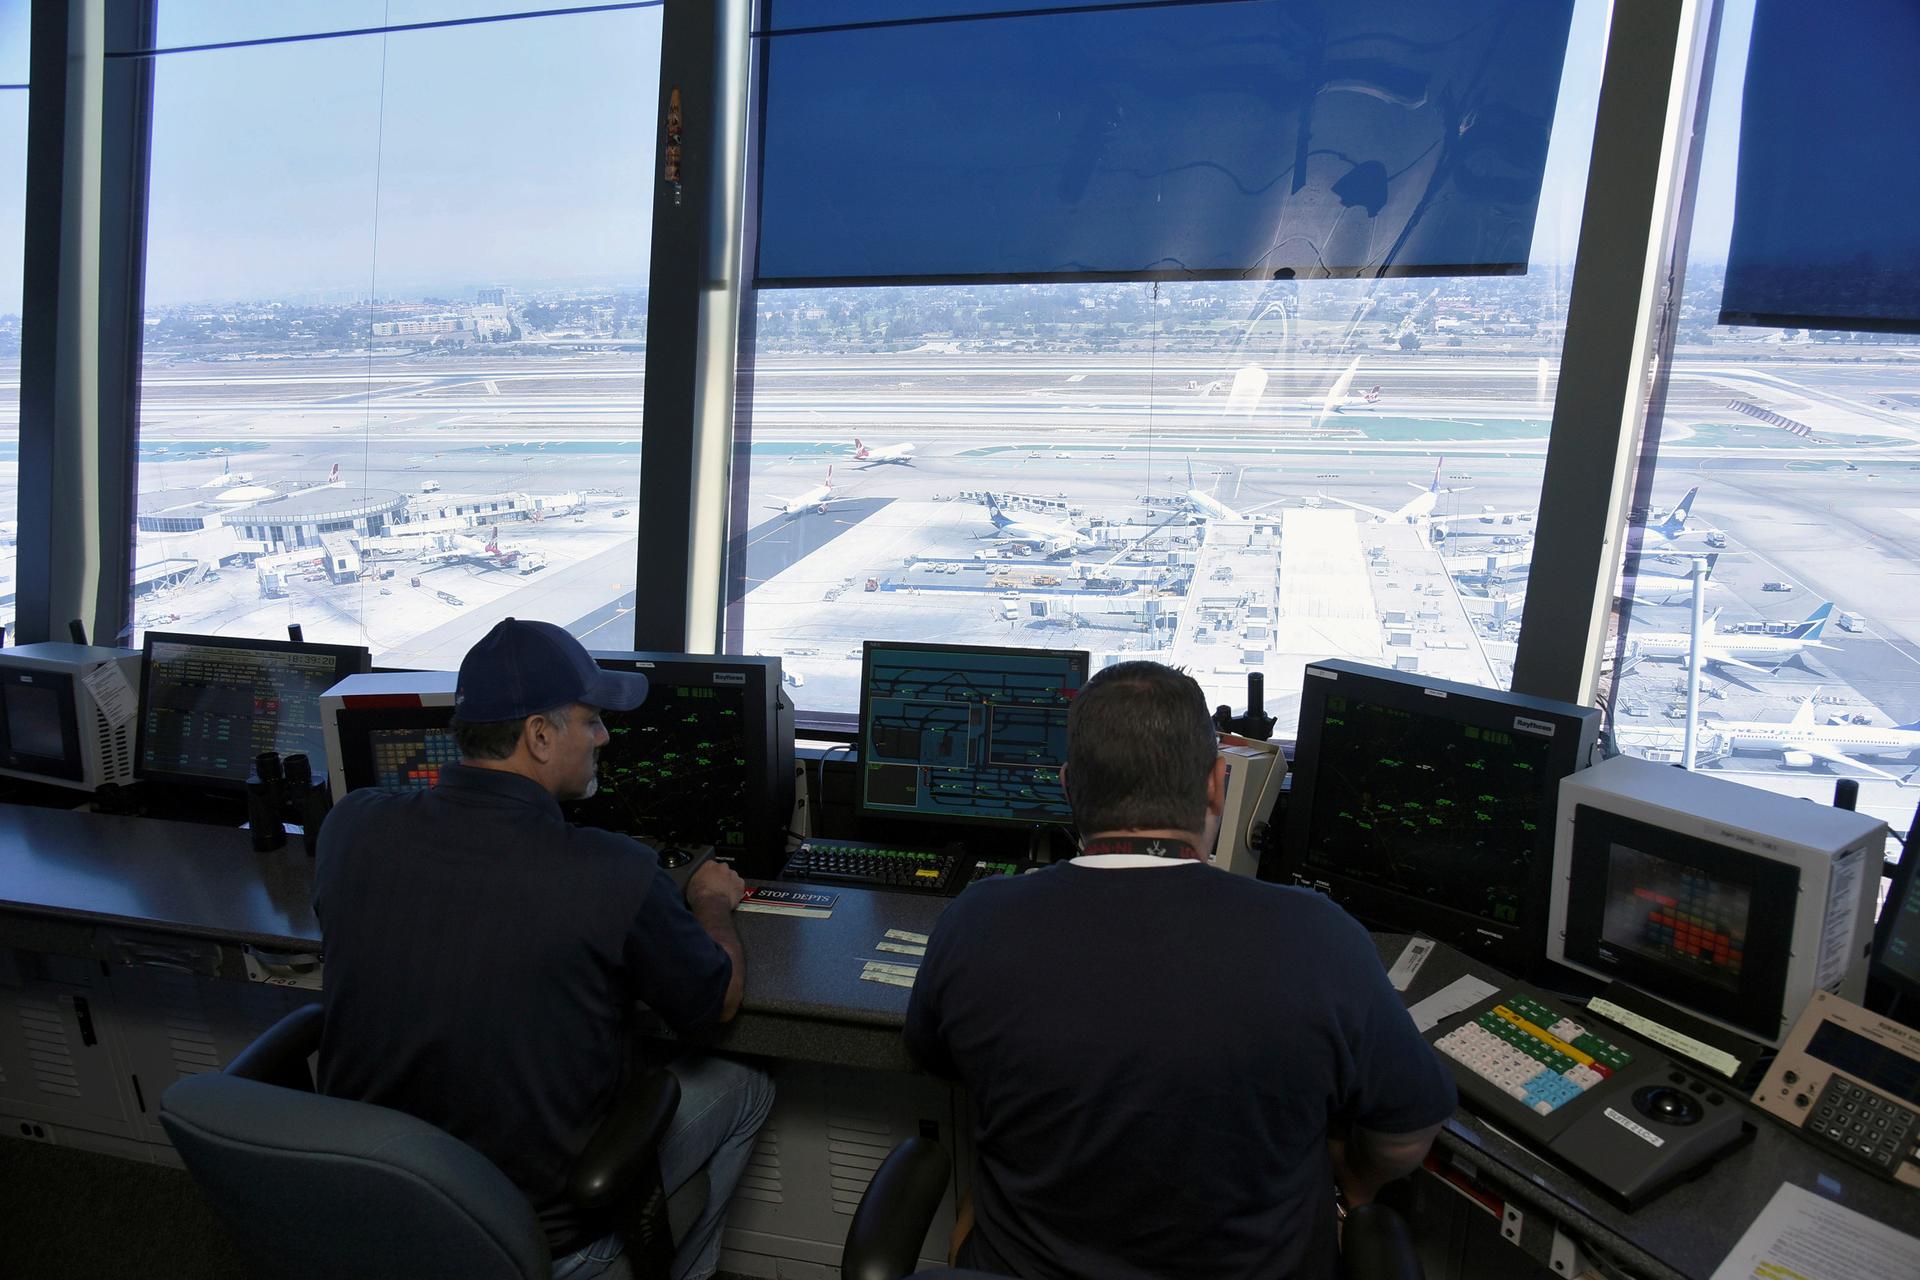 Air traffic controllers work inside the control tower at Los Angeles International Airport (LAX) in Los Angeles, California, U.S. on June 24, 2016.